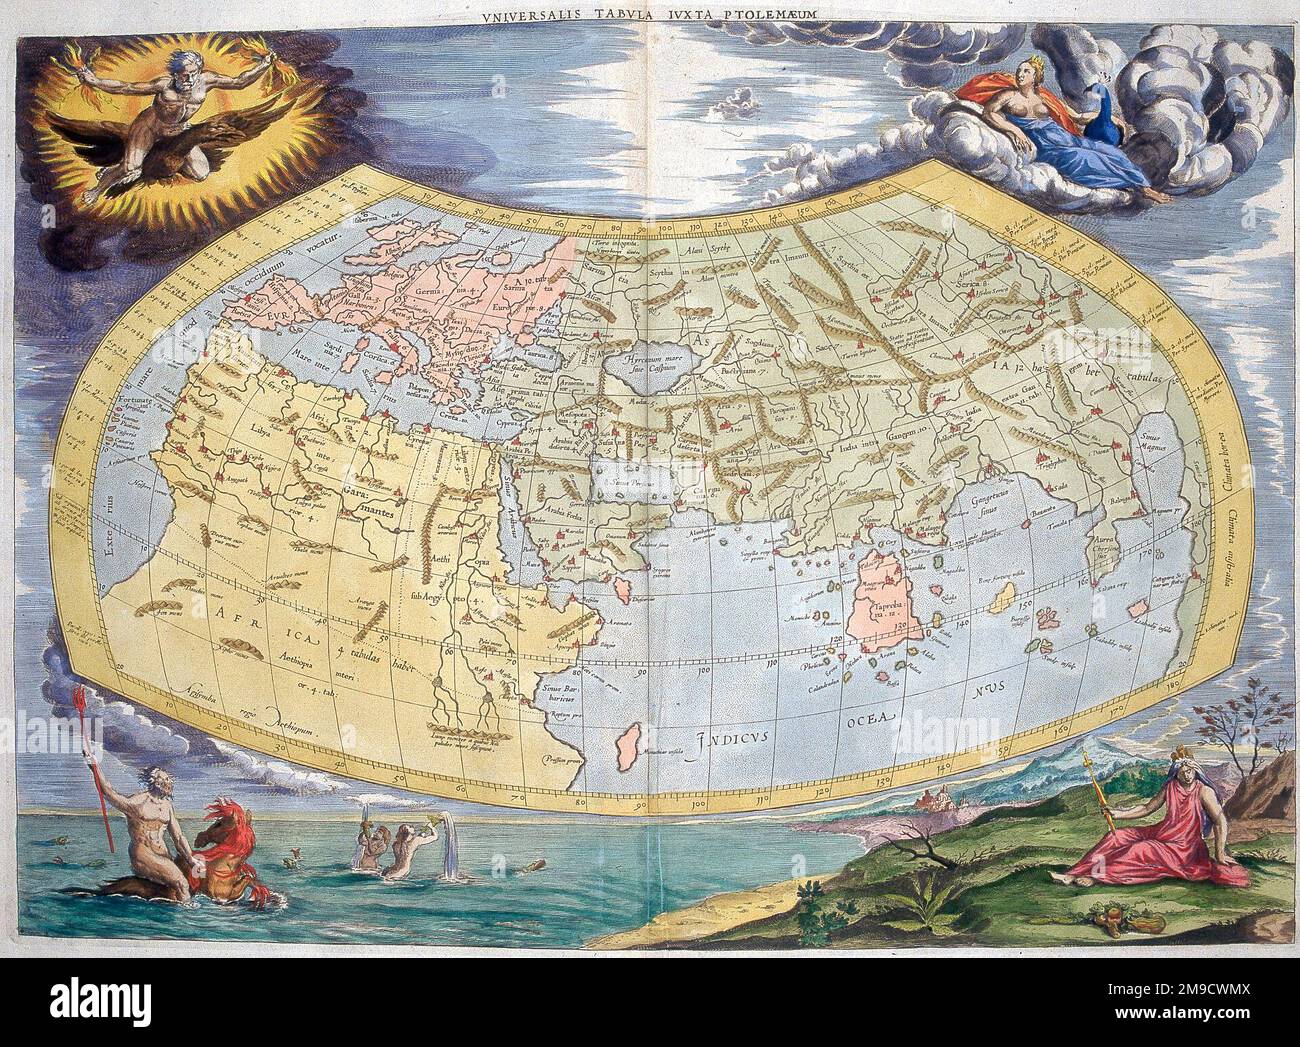 Map Of The Old World According To Ptolemy 2nd Century 2M9CWMX 